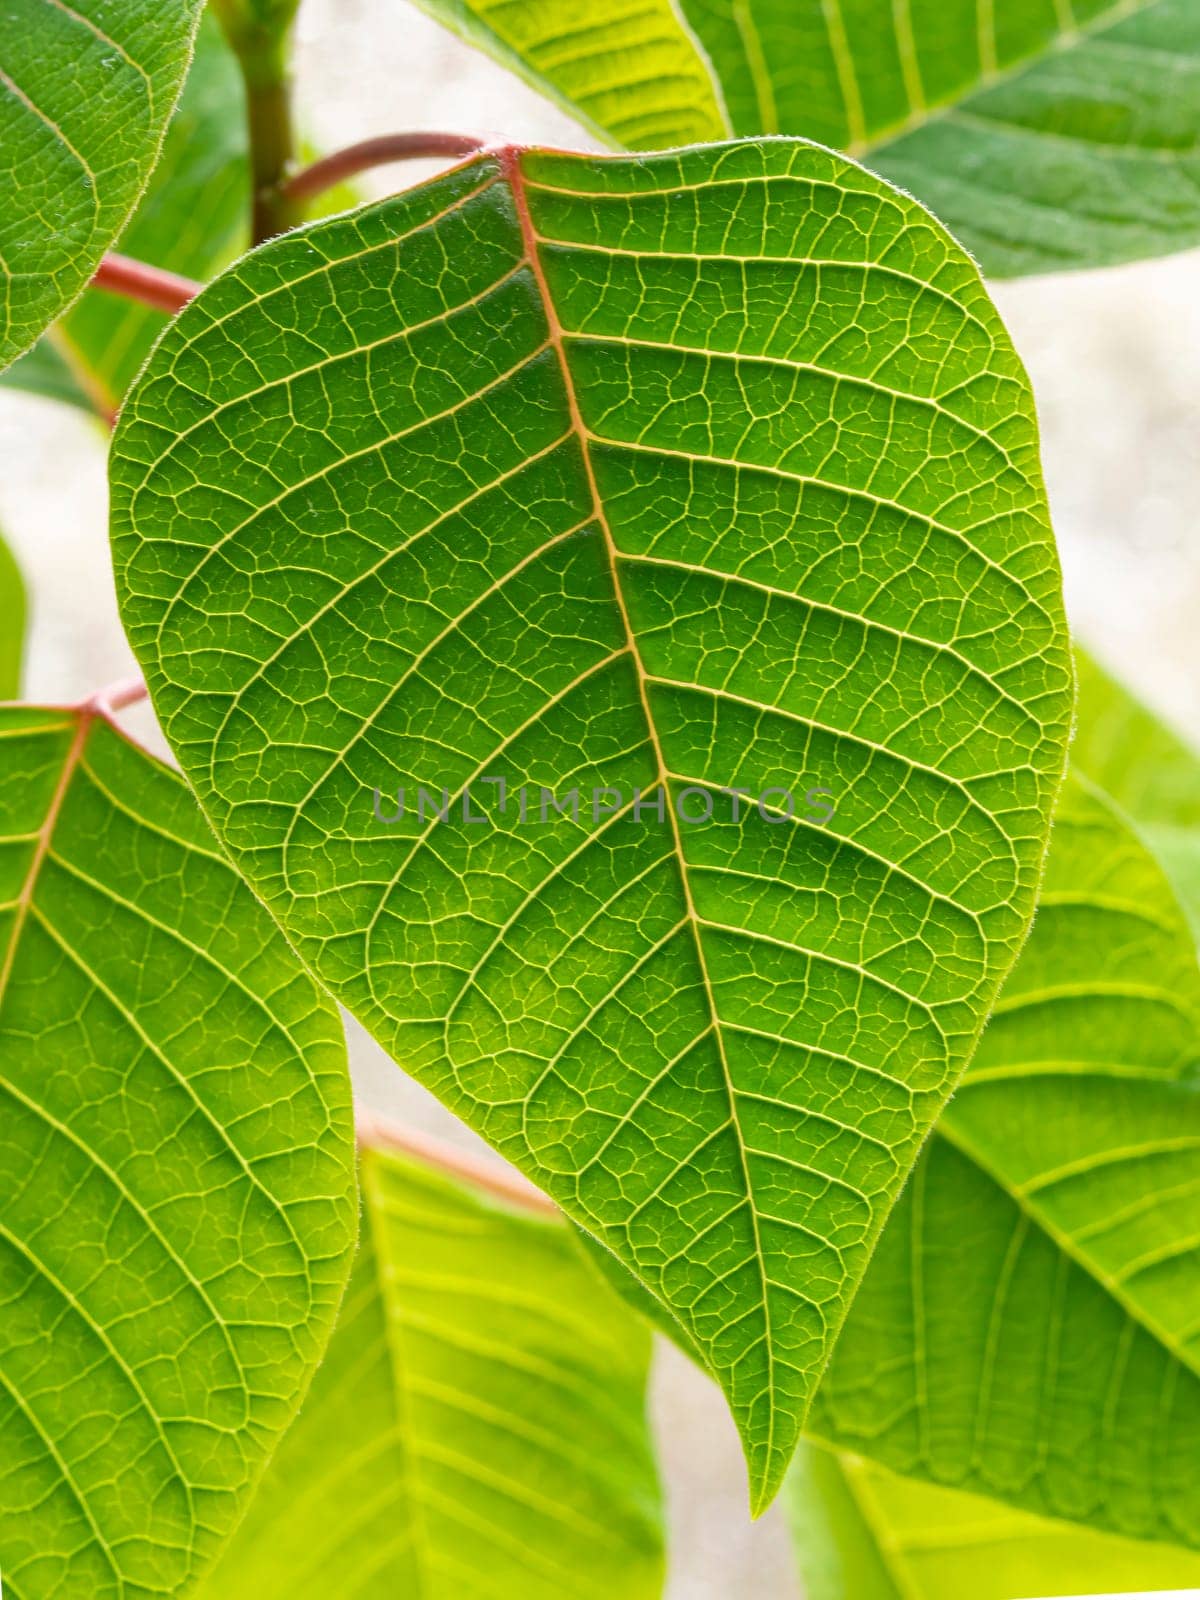 green leaf background with sunlight in a sunny day outdoors by Andre1ns